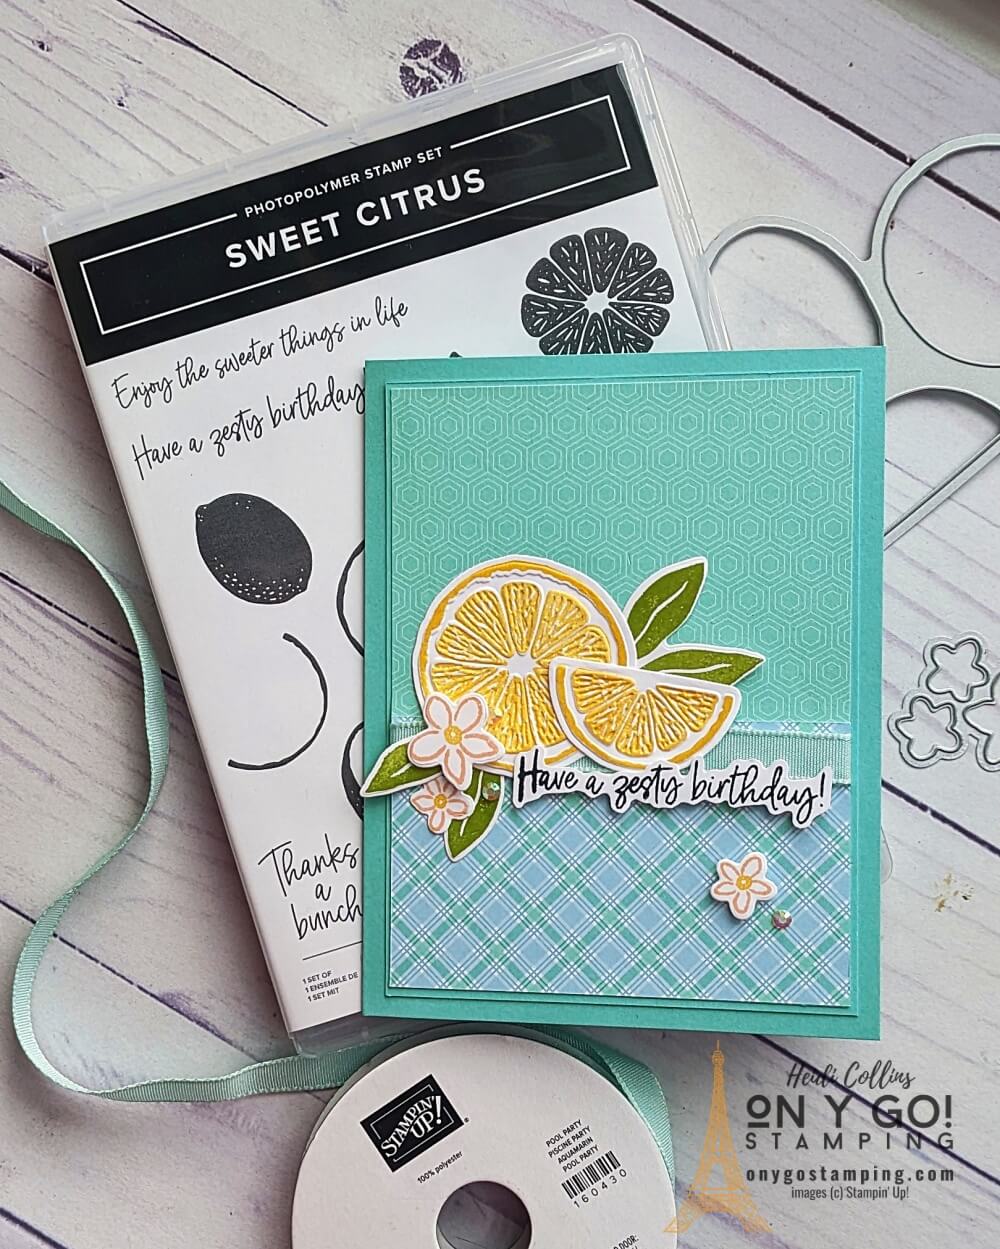 Create a cheery handmade birthday cards with fun lemons using the Sweet Citrus stamp set, embossing folder, and dies from Stampin' Up! These stamps and accessories will be in the 2023 January-April Mini Catalog.